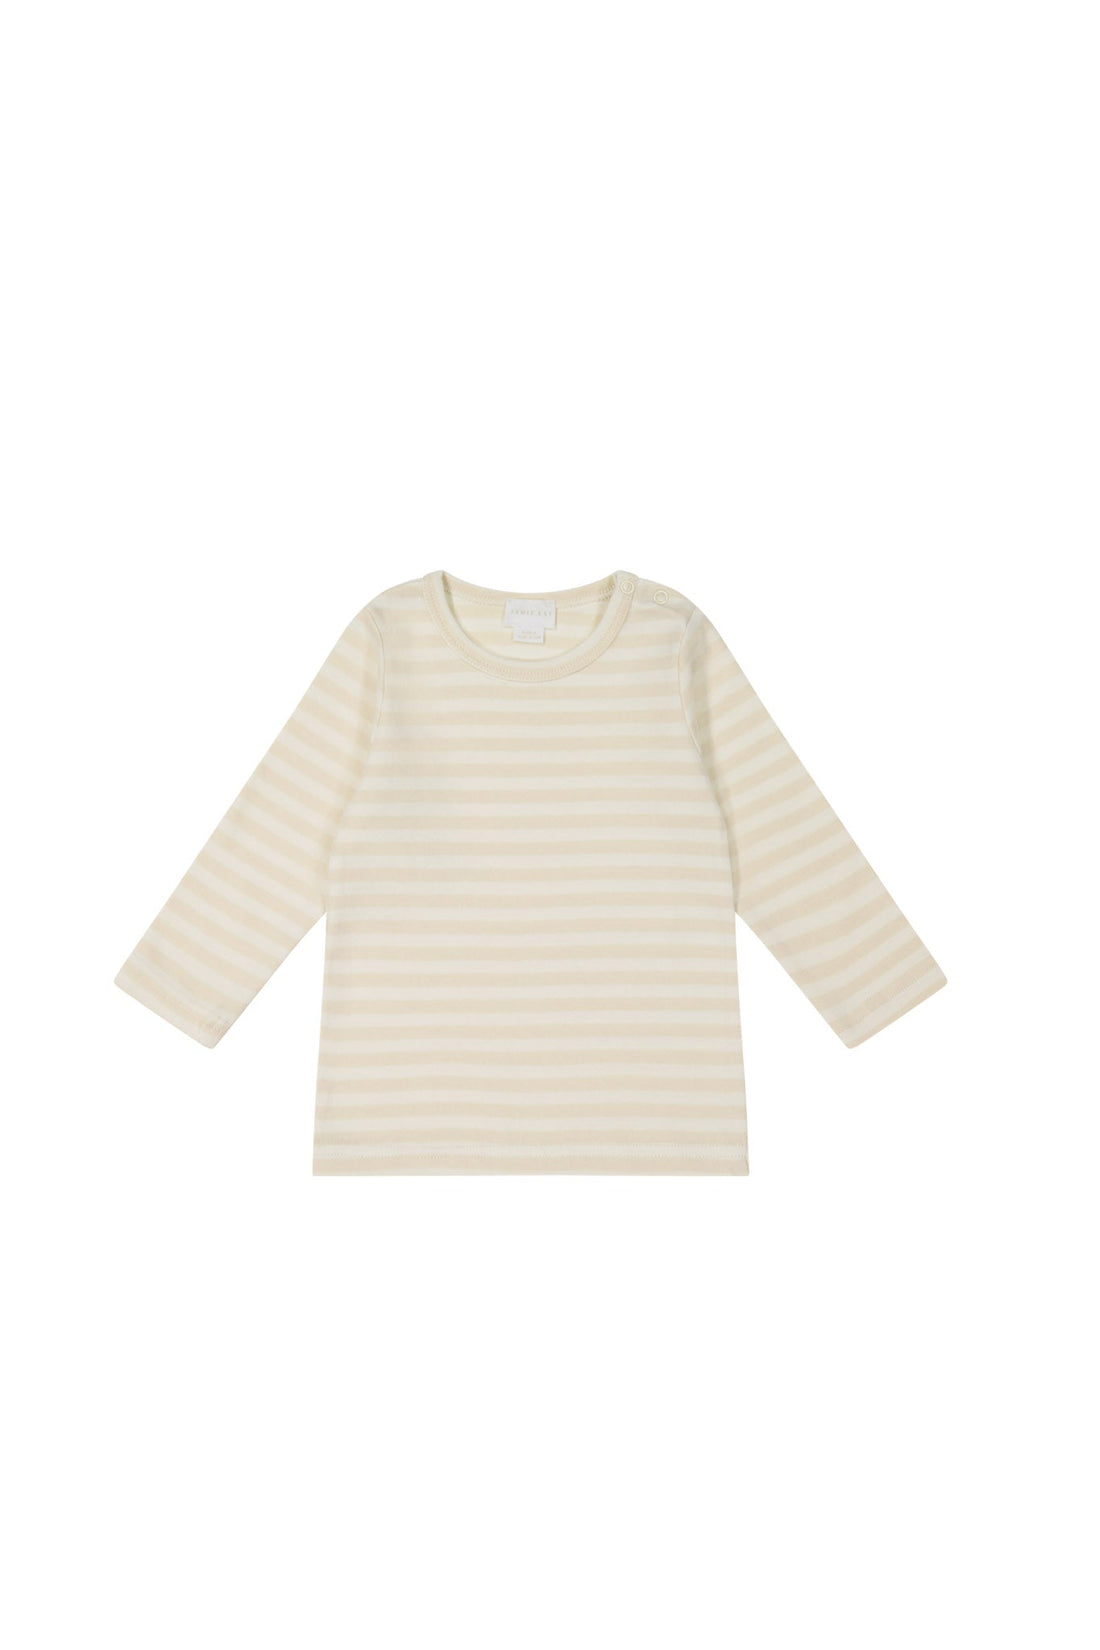 Pima Cotton Vinny Long Sleeve Top - Oat/Cloud Stripe Childrens Top from Jamie Kay USA